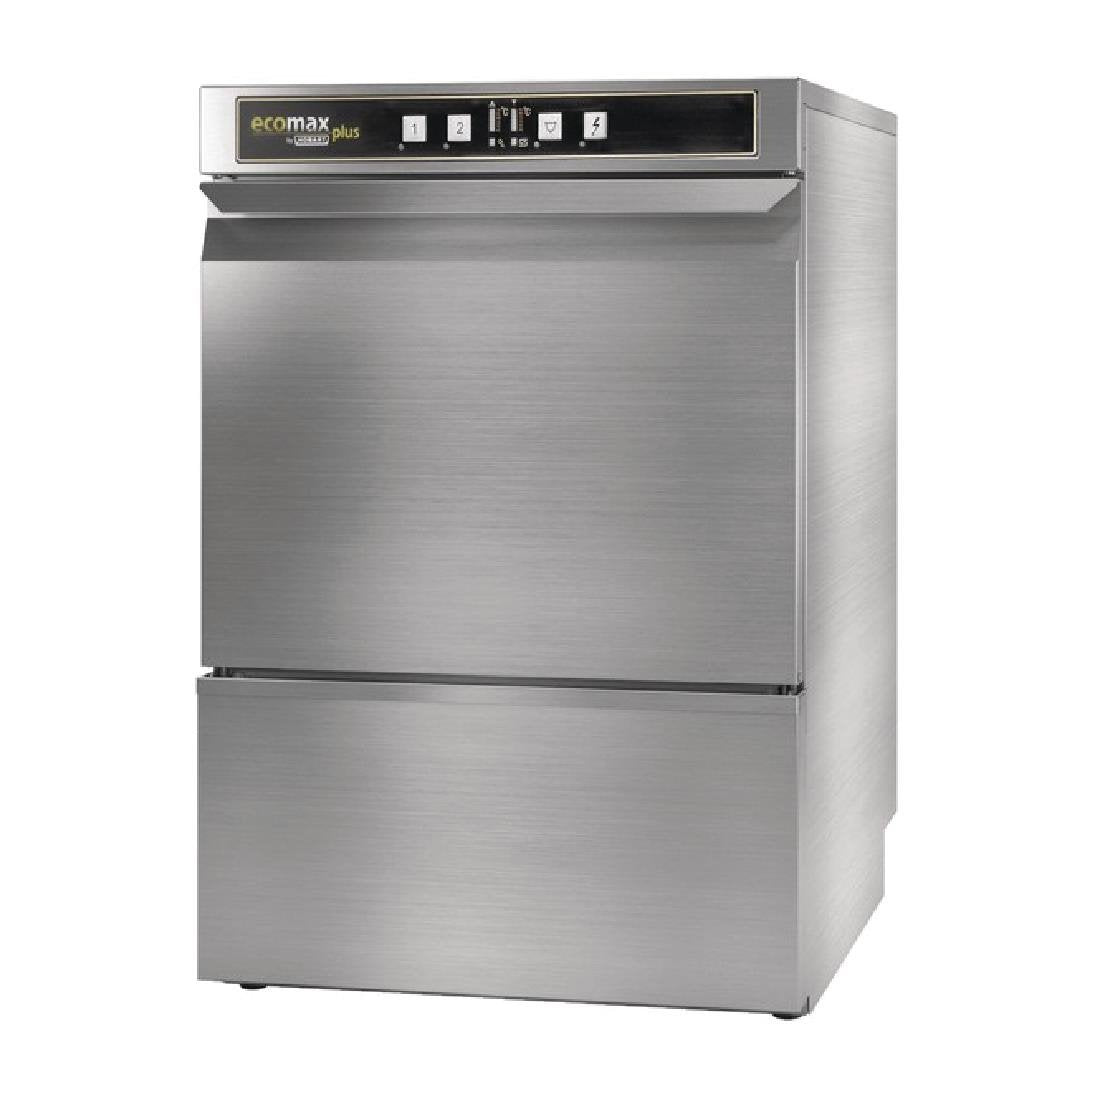 DW259-MO Hobart Ecomax Plus Glasswasher G415SW with Water Softener